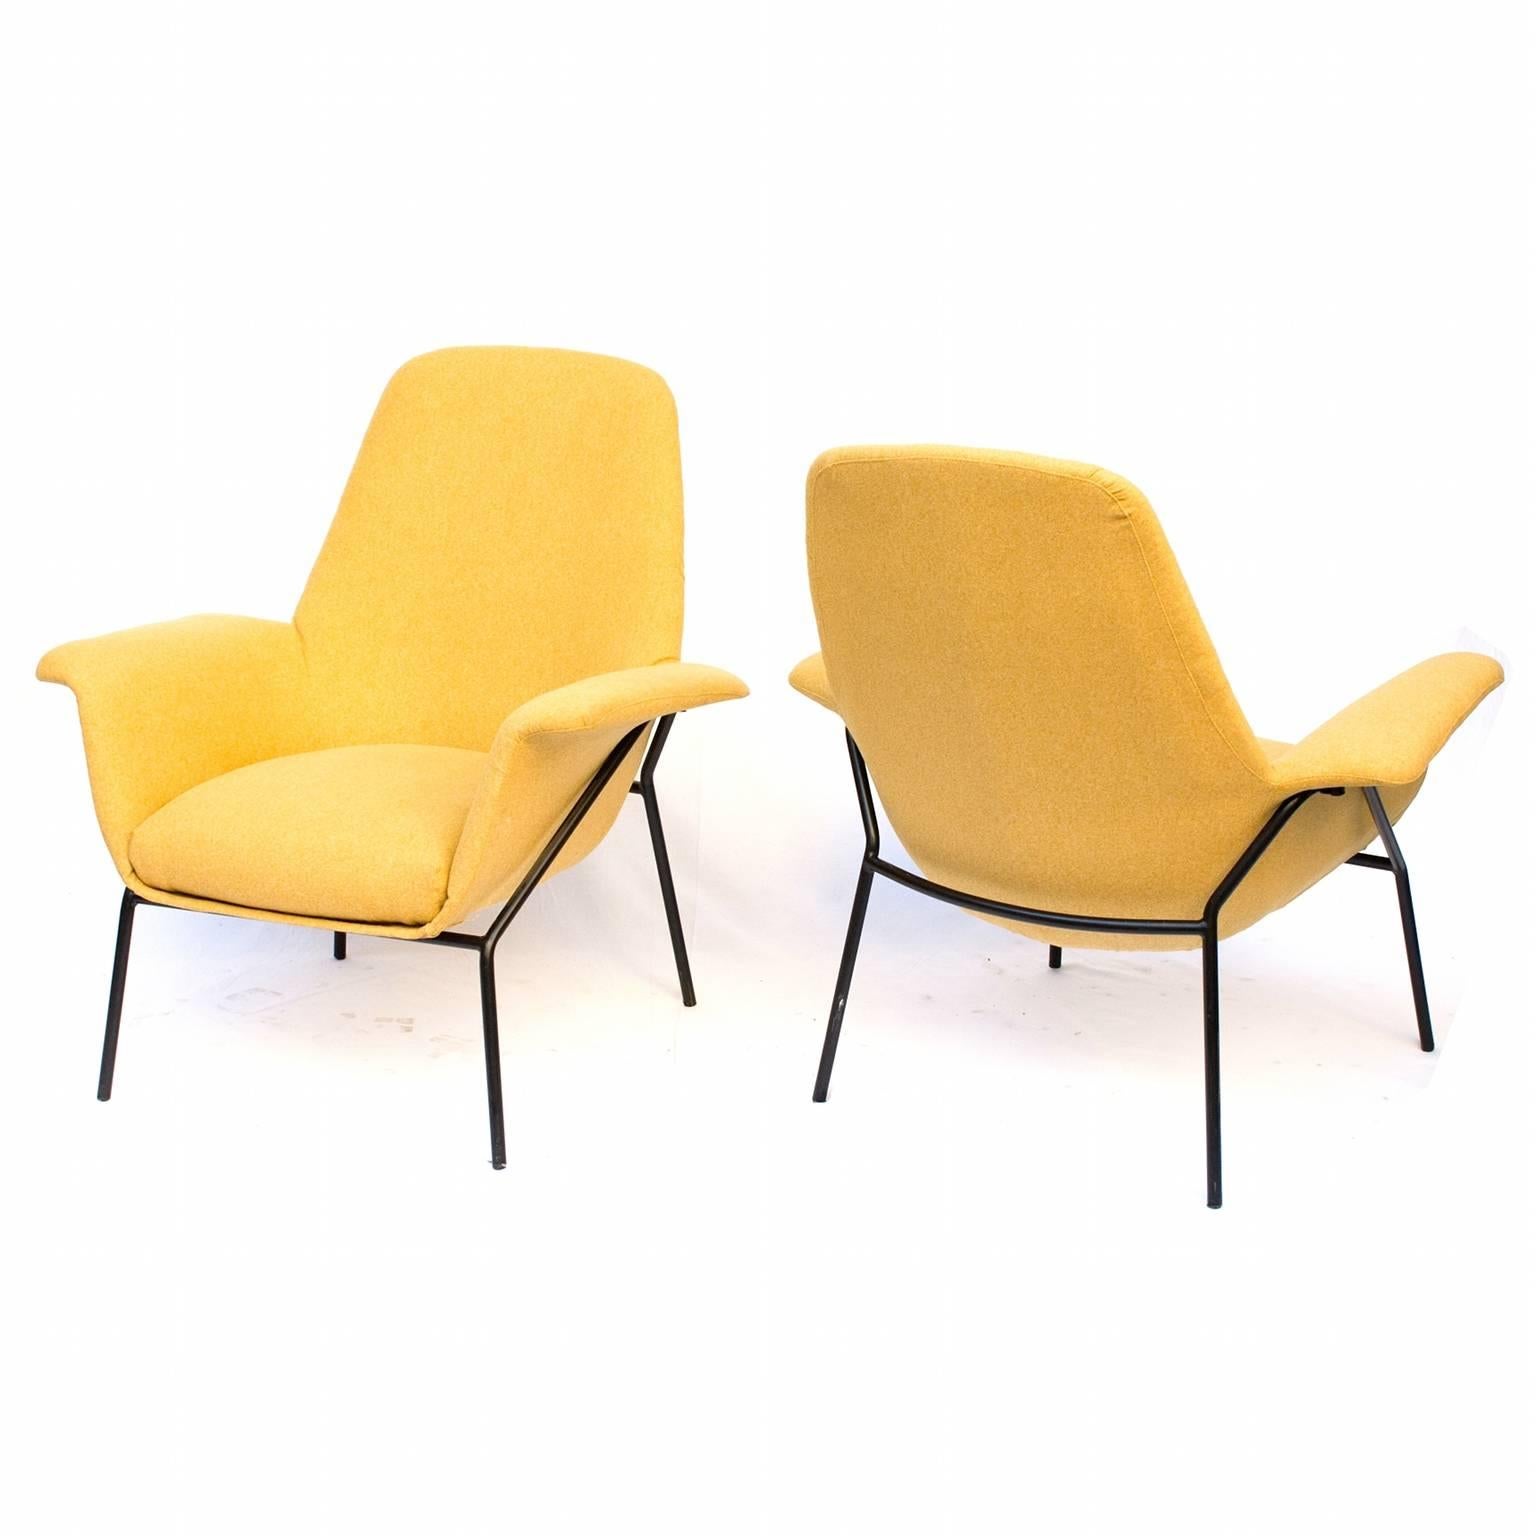 Pair of upholstered armchairs, model Lucania designed by Gian Carlo De Carli for Arflex in 1955. Metal body. Reupholstered and relined.